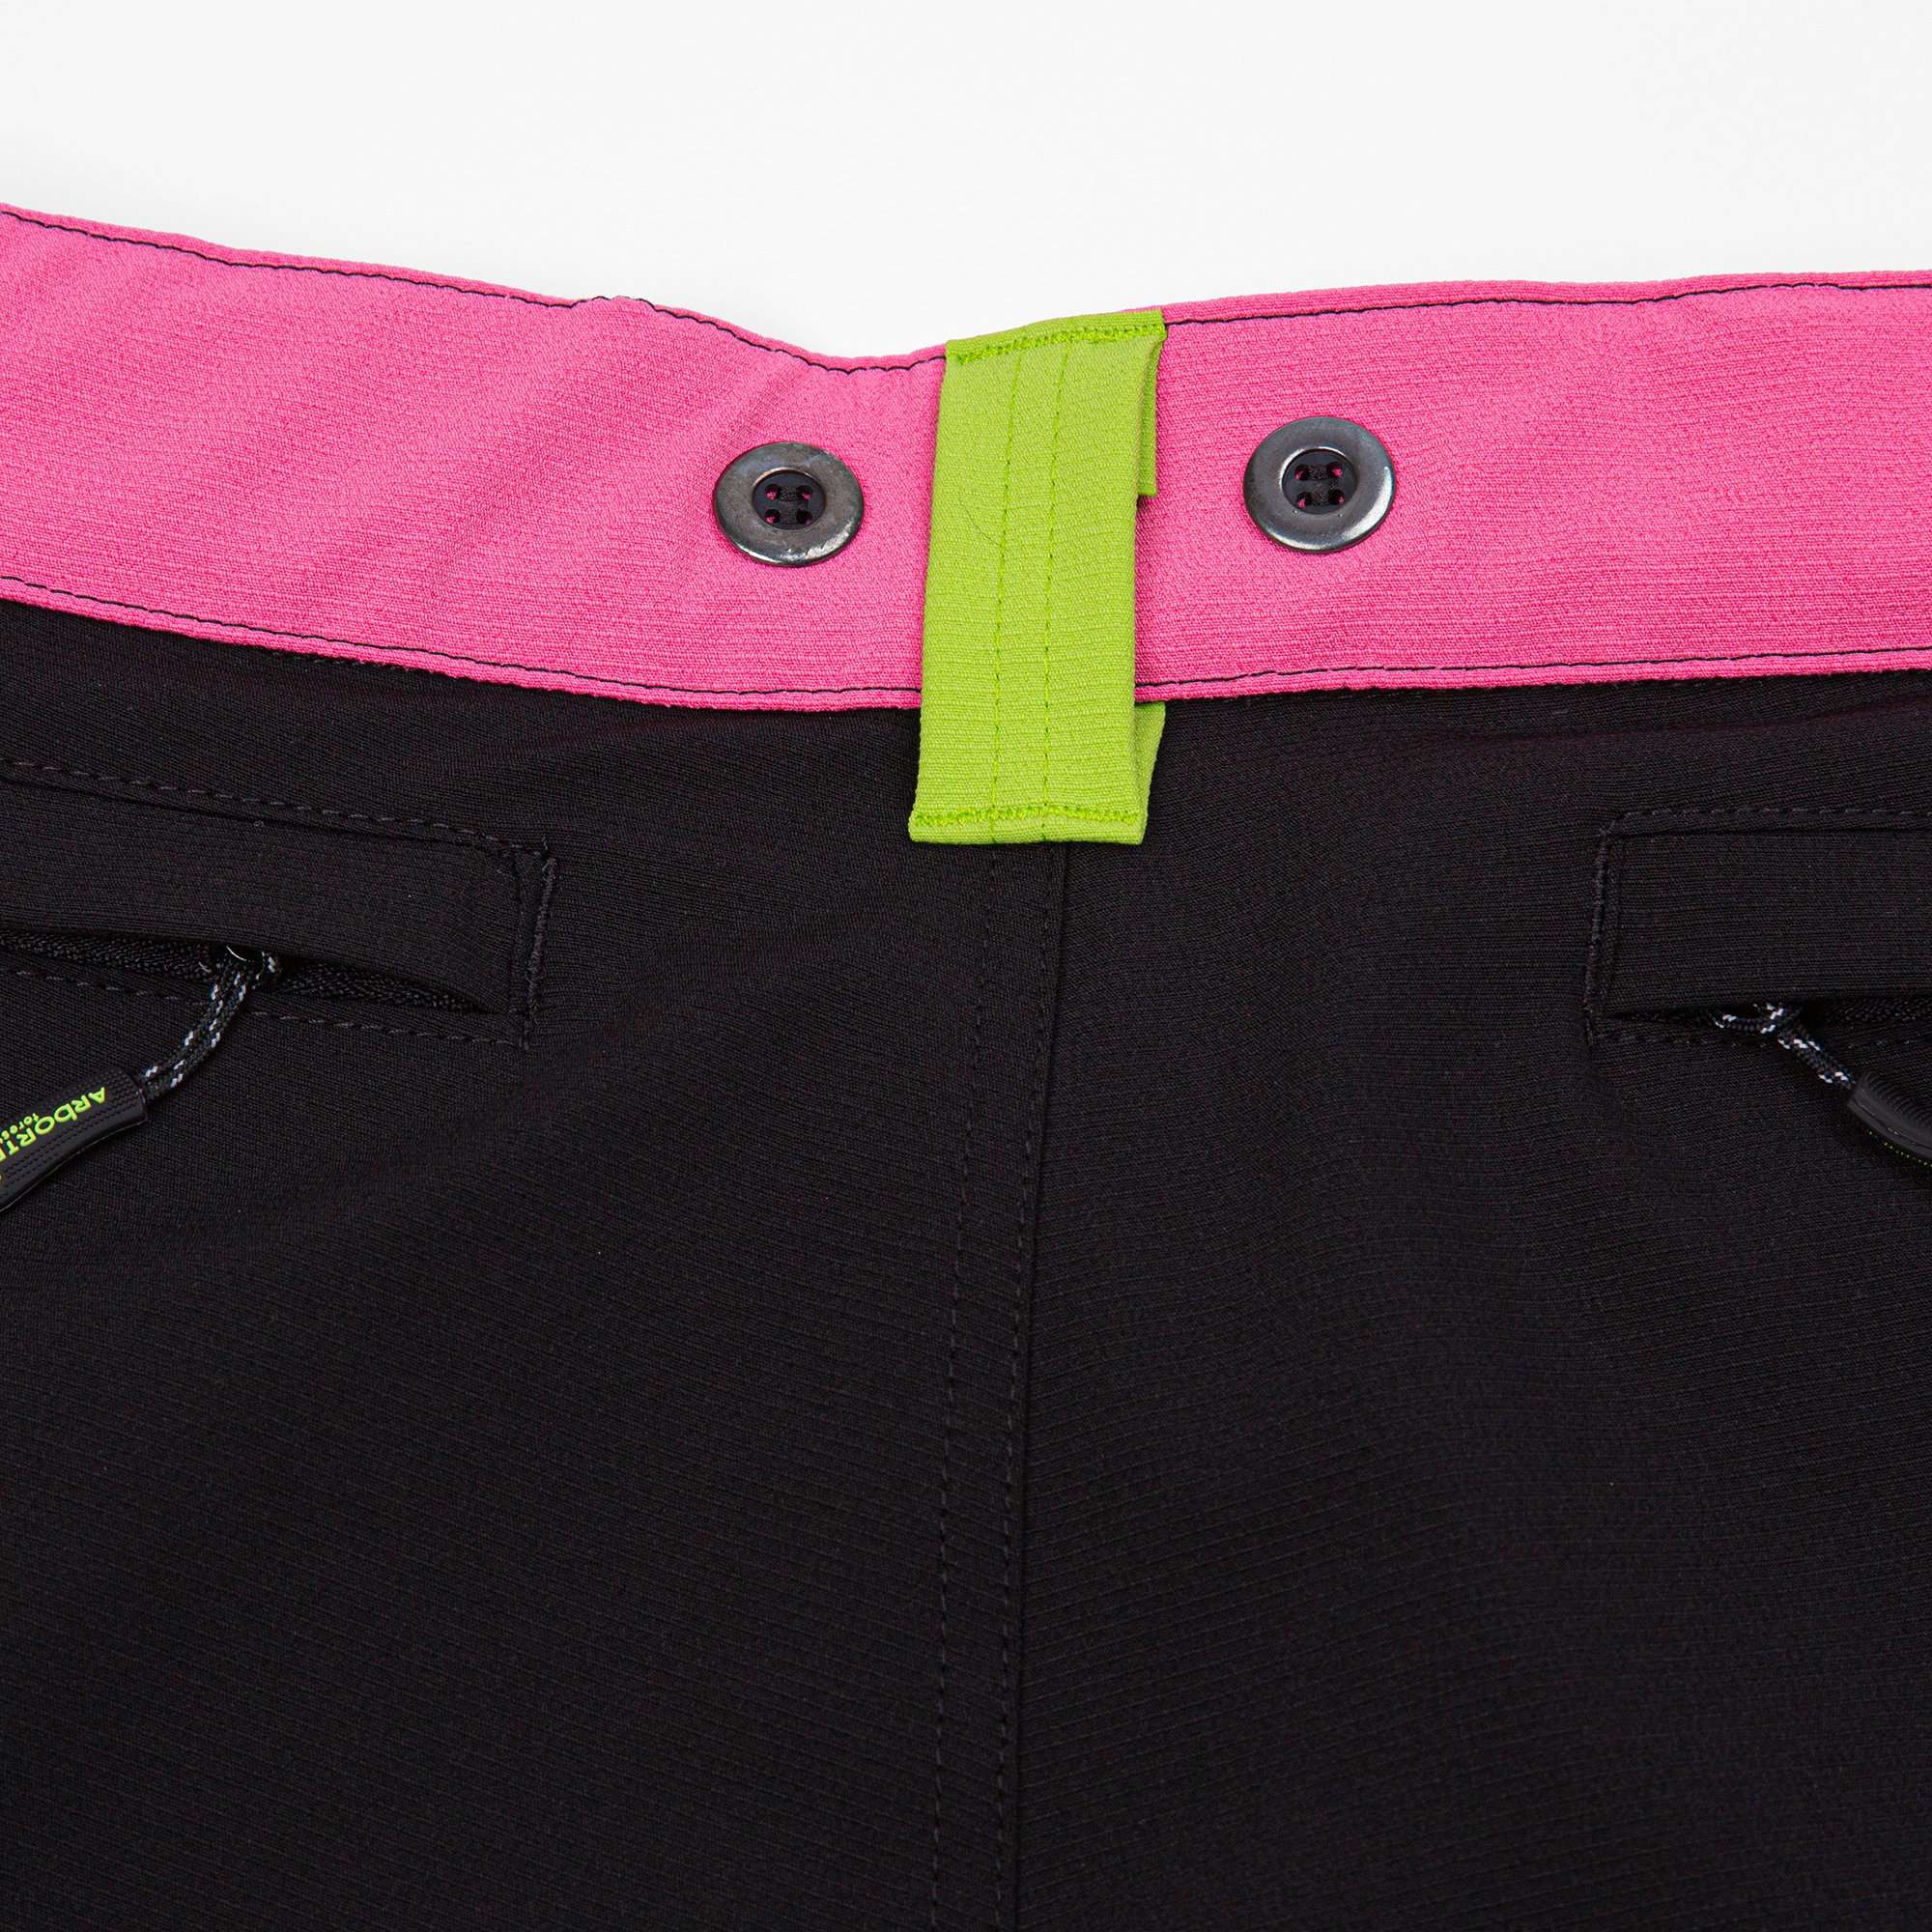 AT4050 Breatheflex Ladies Type C Class 1 Chainsaw Trousers - Pink - Arbortec Forestwear